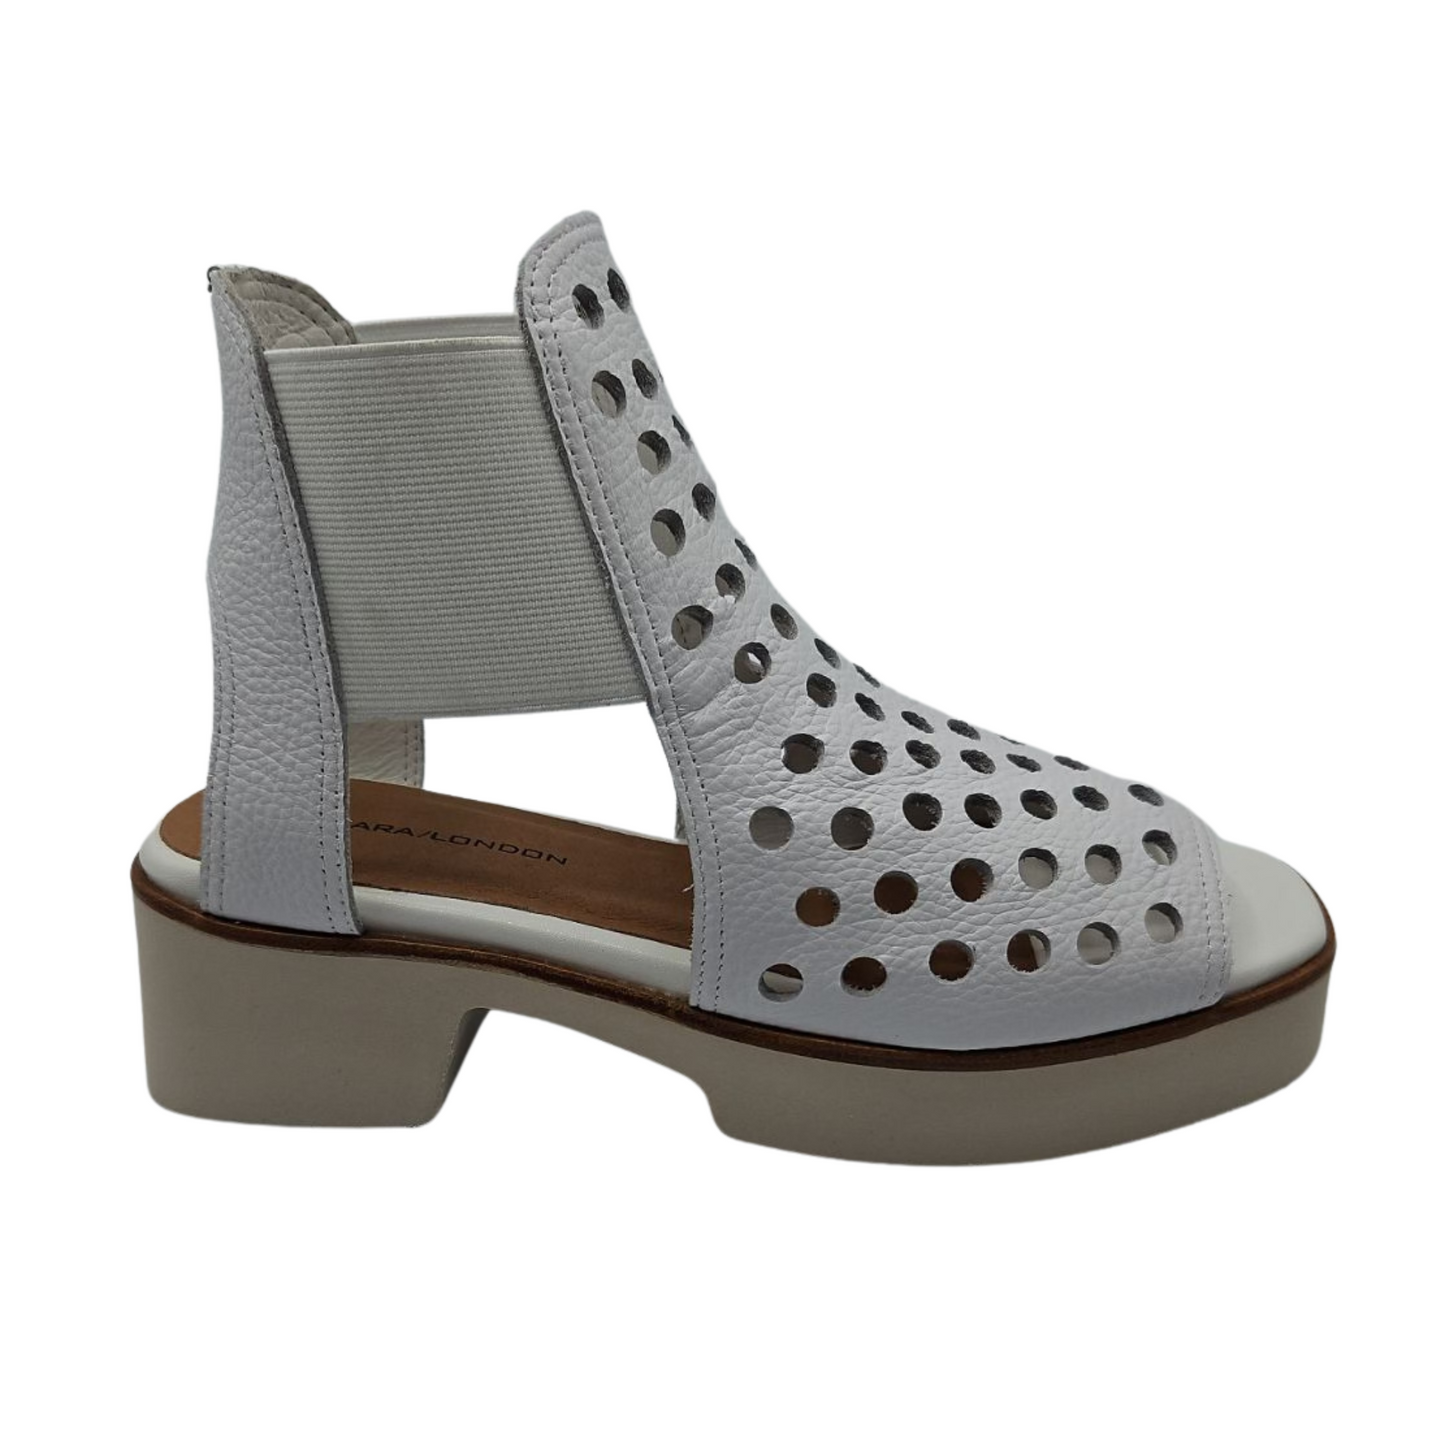 Right facing view of white perforated leather sandals with elastic sides and platform sole